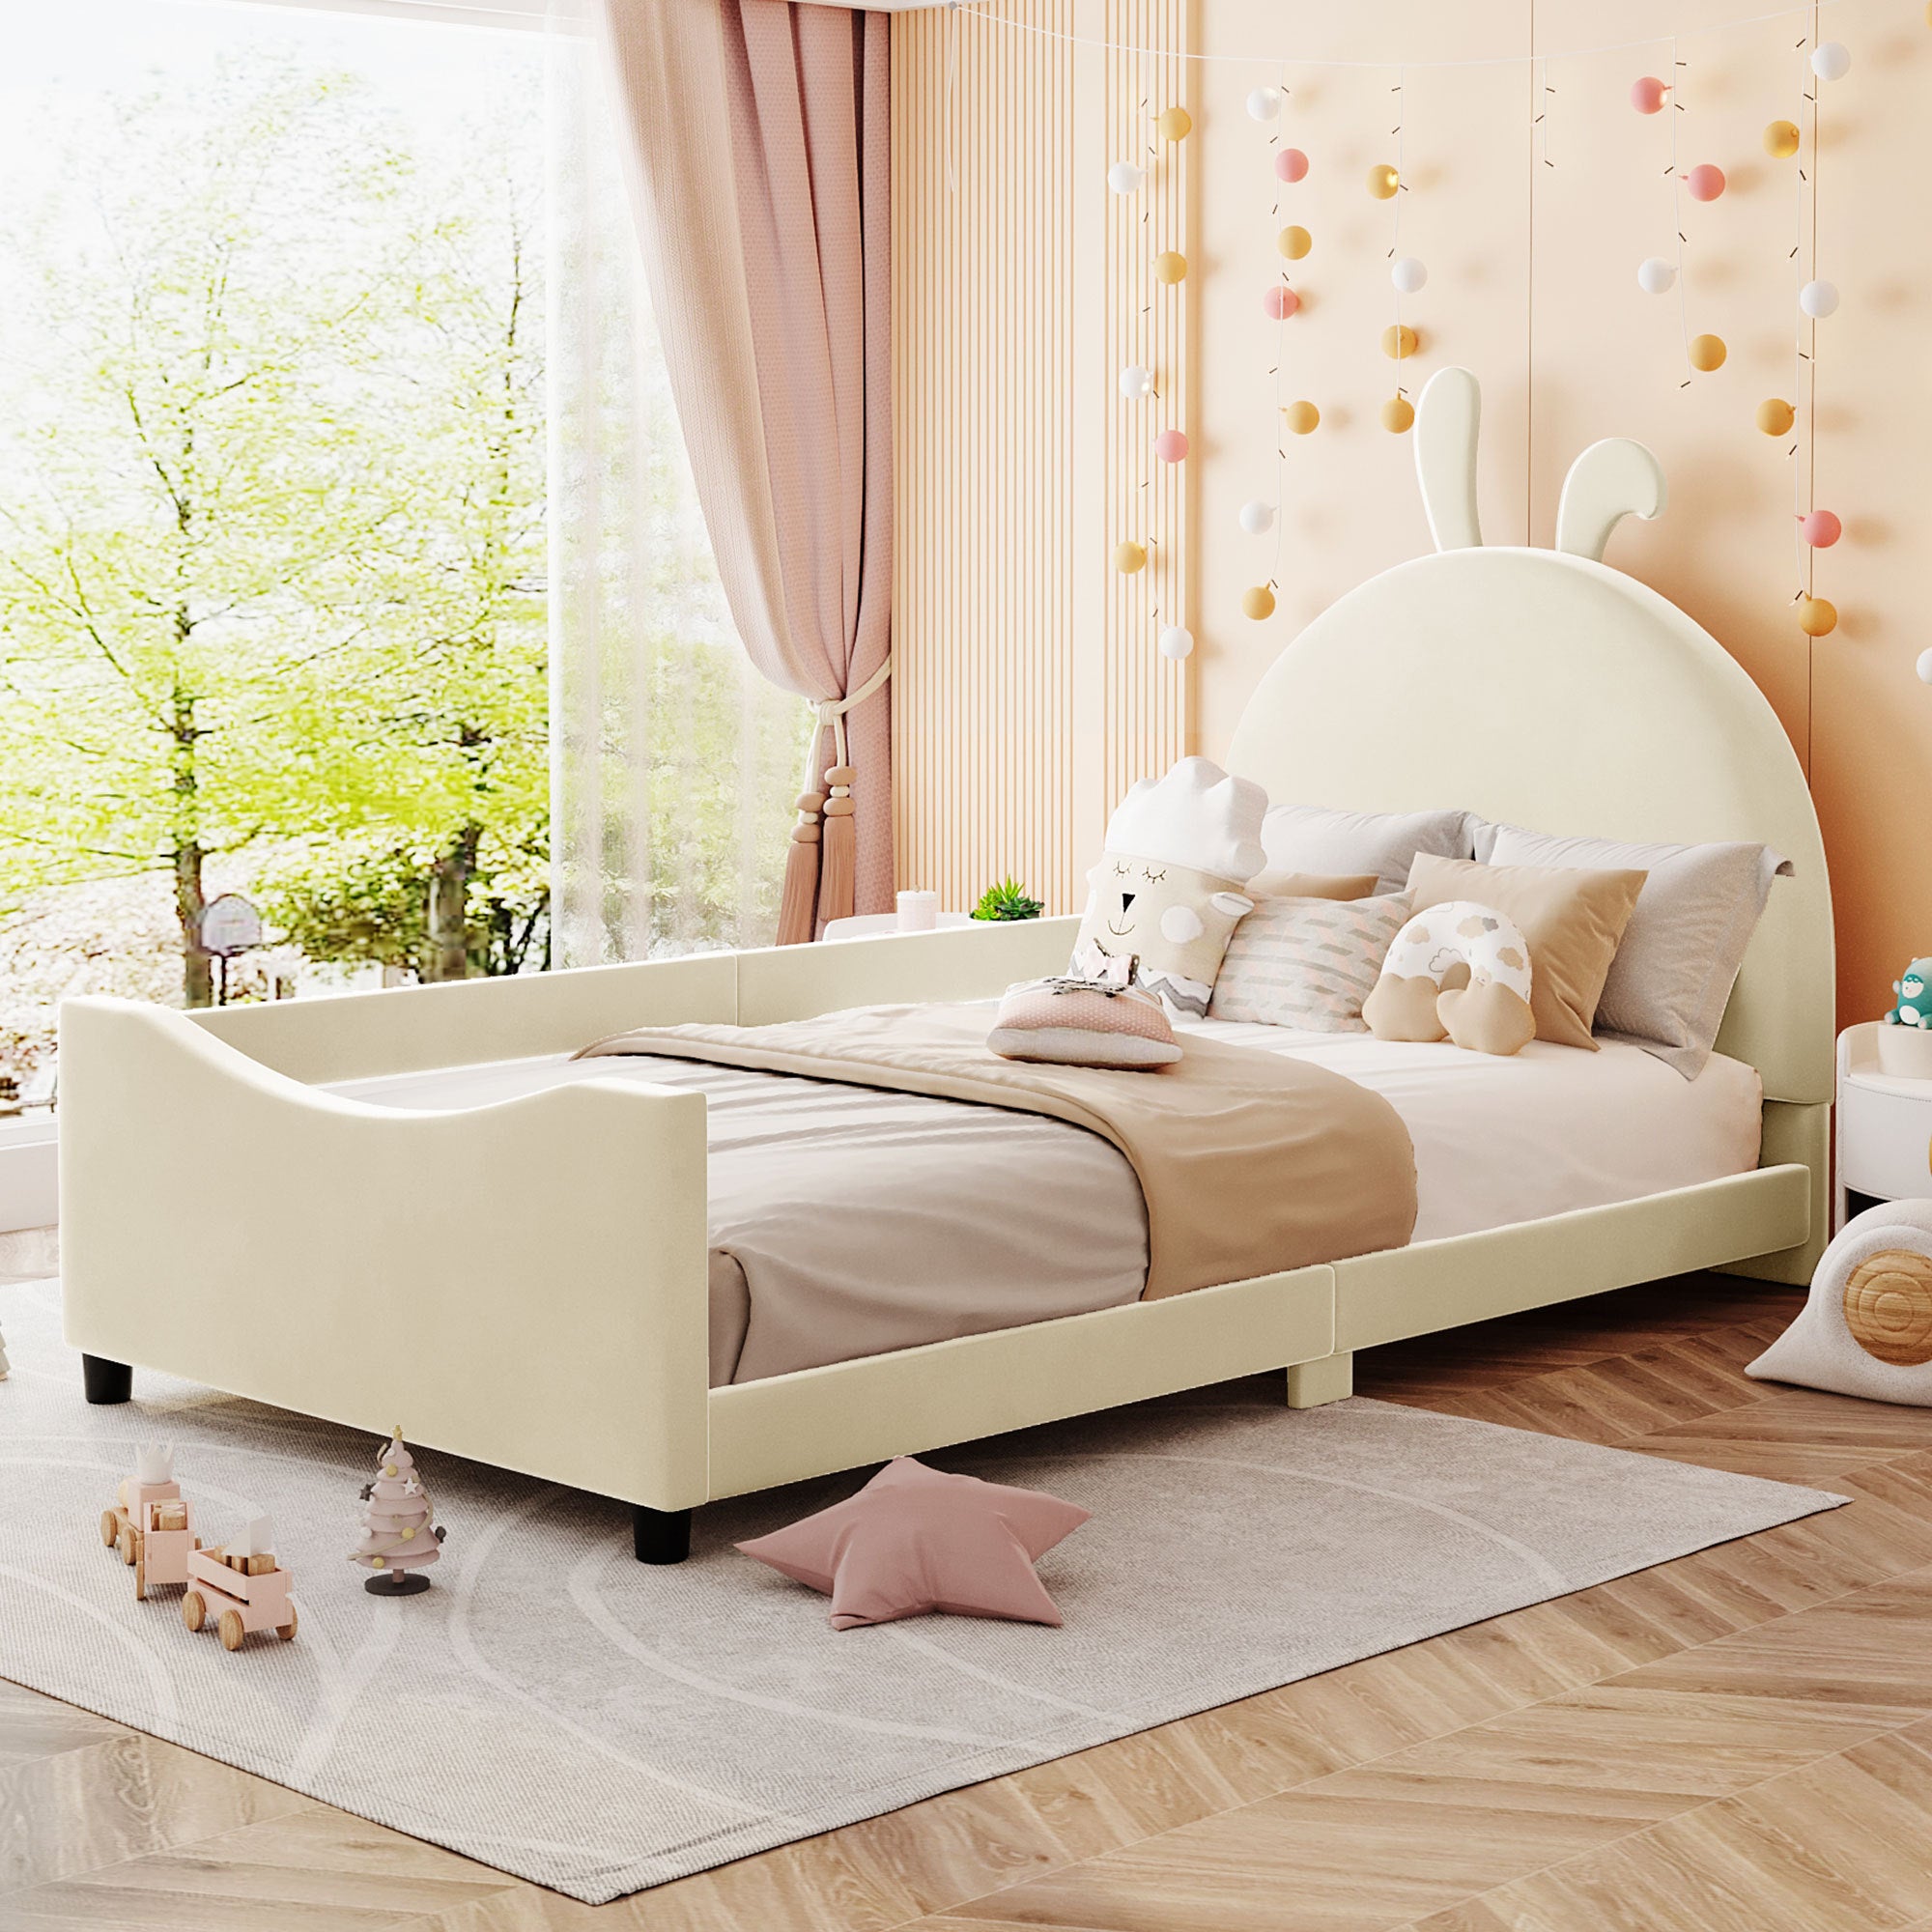 Twin Size Upholstered Daybed with Rabbit Ear Shaped beige-velvet